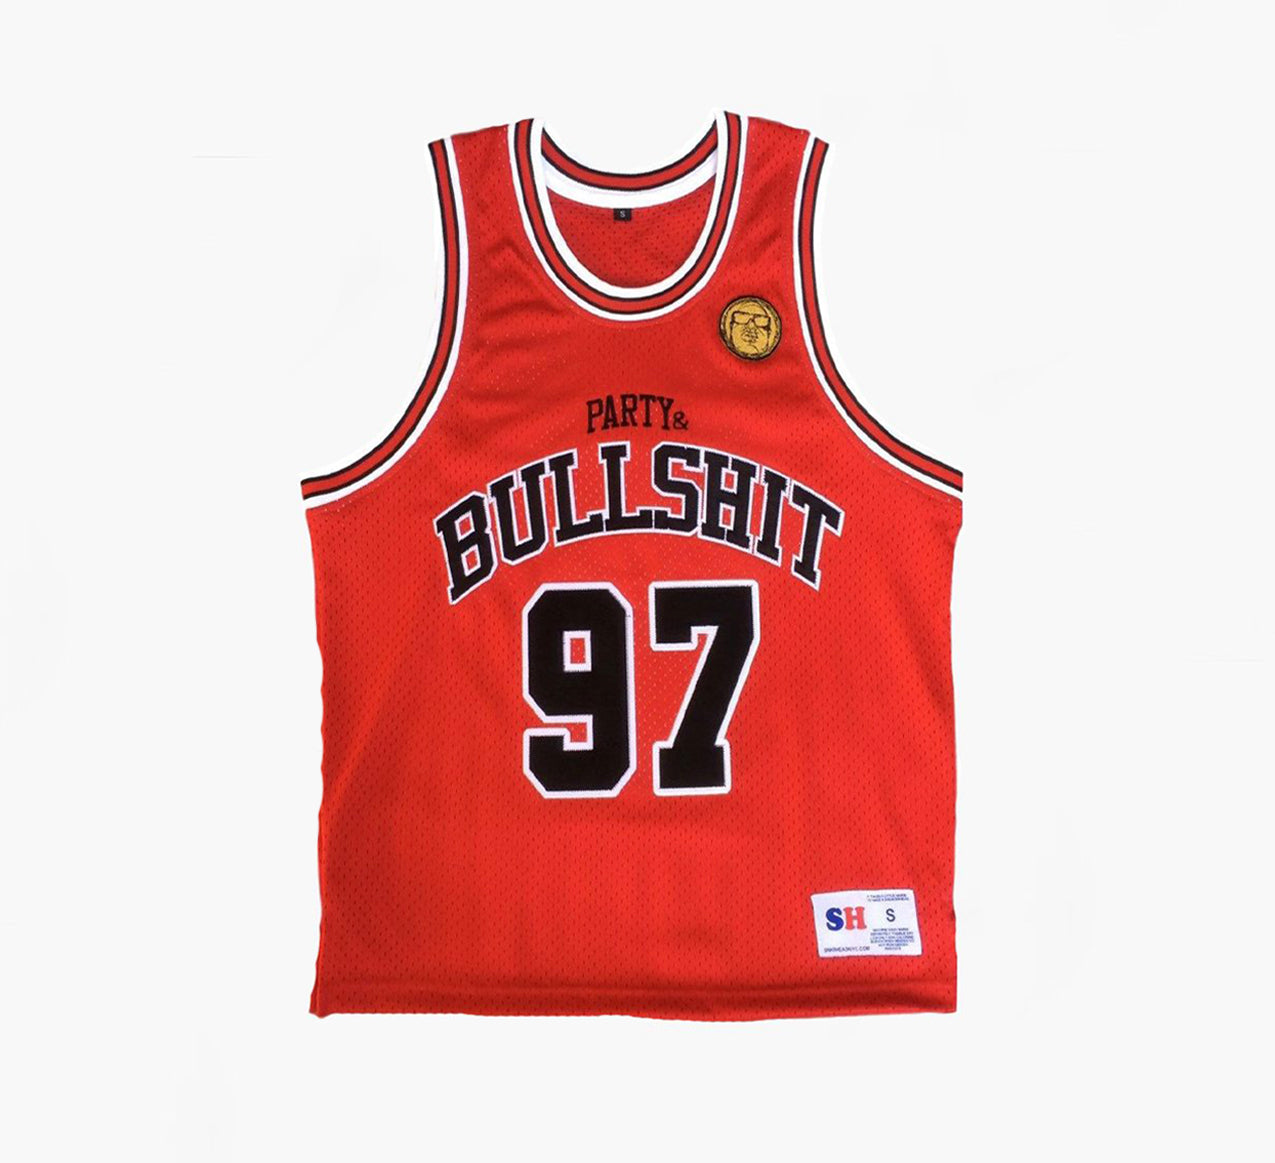 PARTY AND BULLSH*T Red Jersey